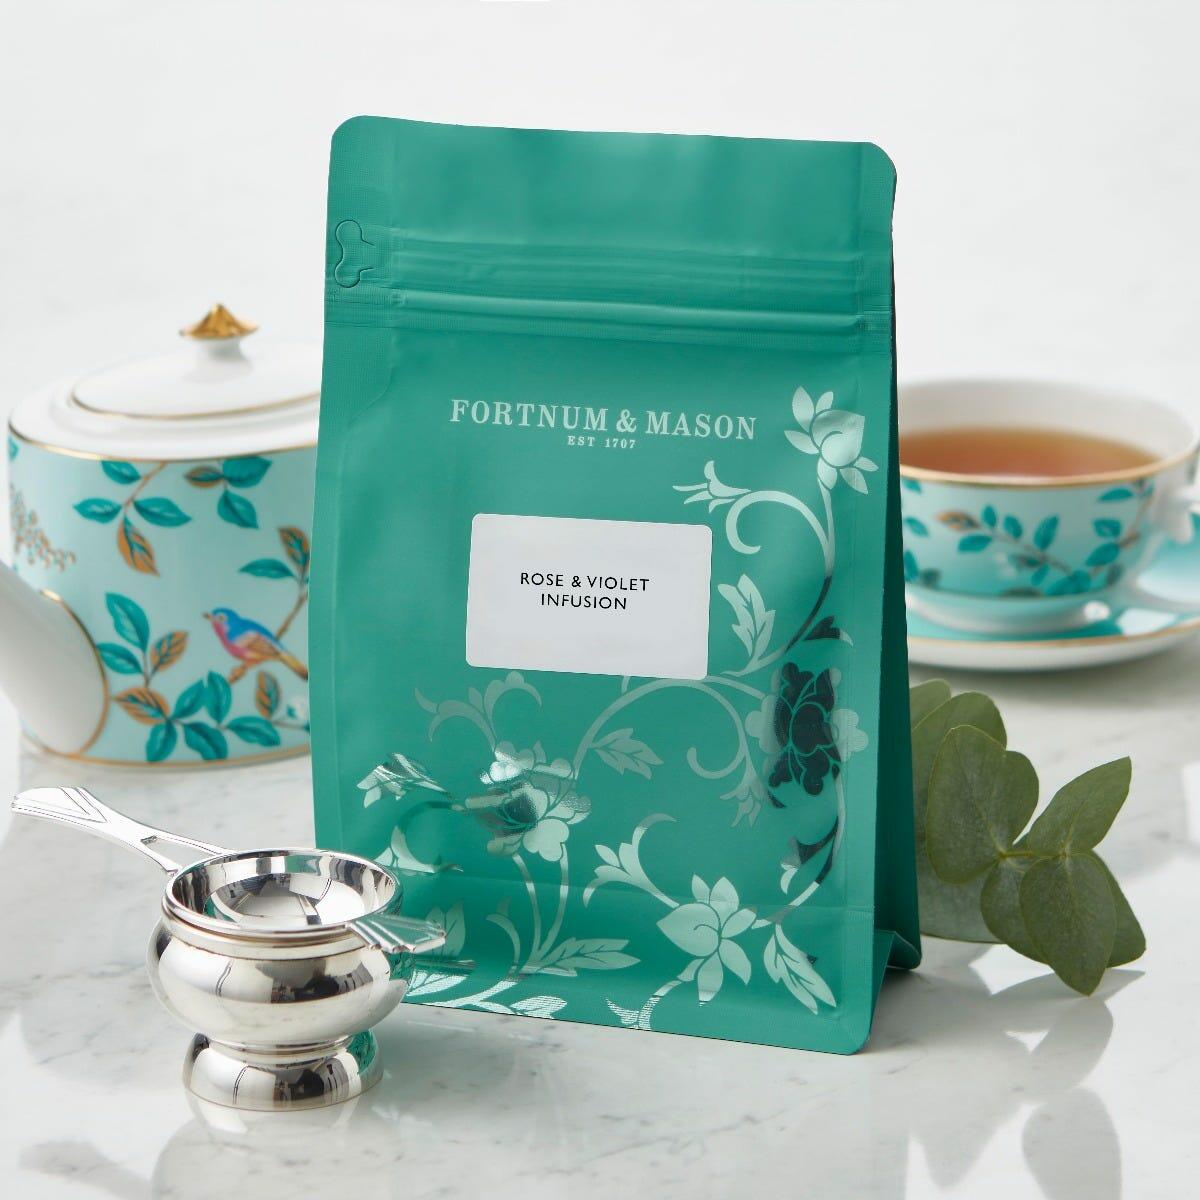 Rose & Violet Infusion Pouch, 15 Silky Tea Bags, 30g, Fortnum & Mason